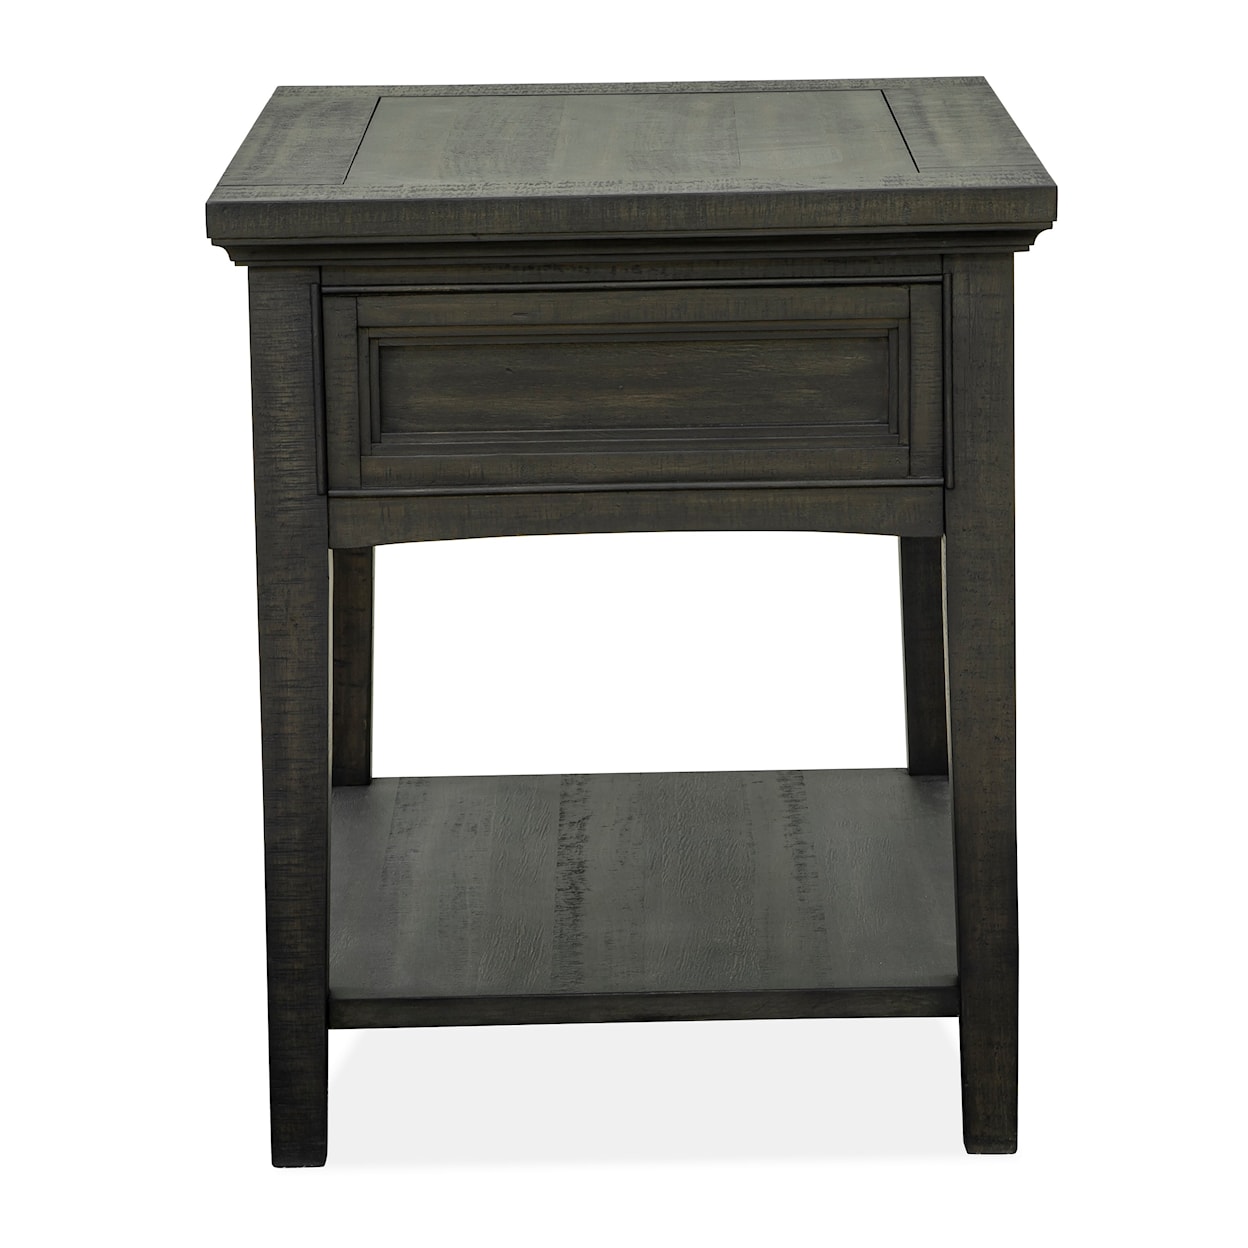 Magnussen Home Westley Falls Occasional Tables Rectangular End Table